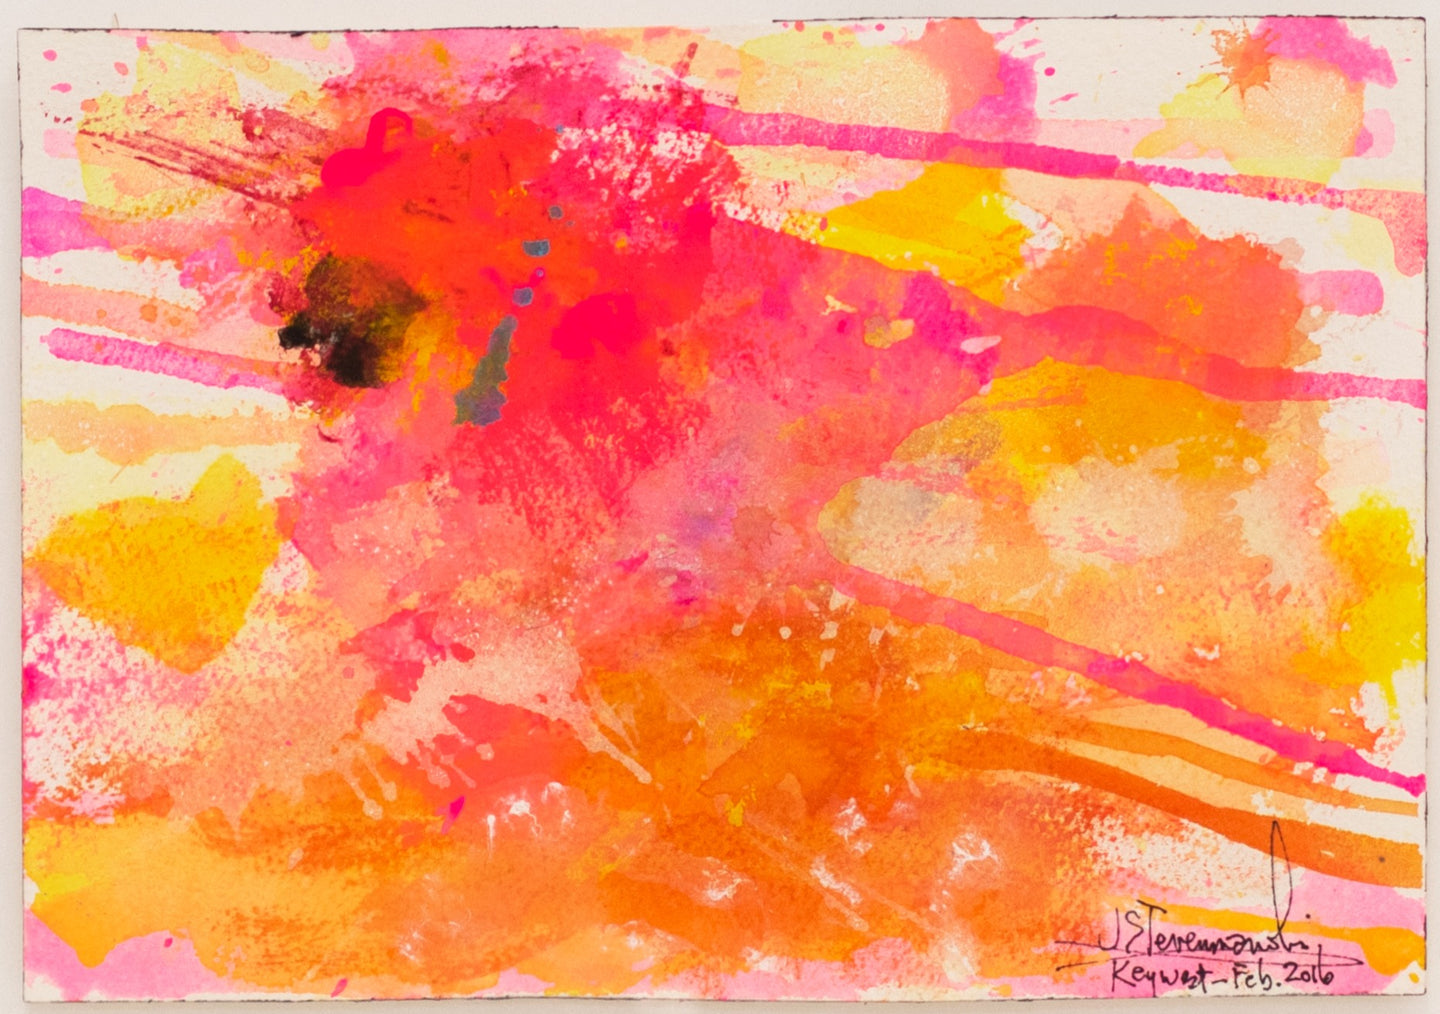 J. Steven Manolis, Flamingo 1832-2016 (Key West) 07.10.03, watercolor painting on paper, 7 x 10 inches, Pink and orange Abstract Art, Tropical Watercolor paintings for sale at Manolis Projects Art Gallery, Miami, Fl